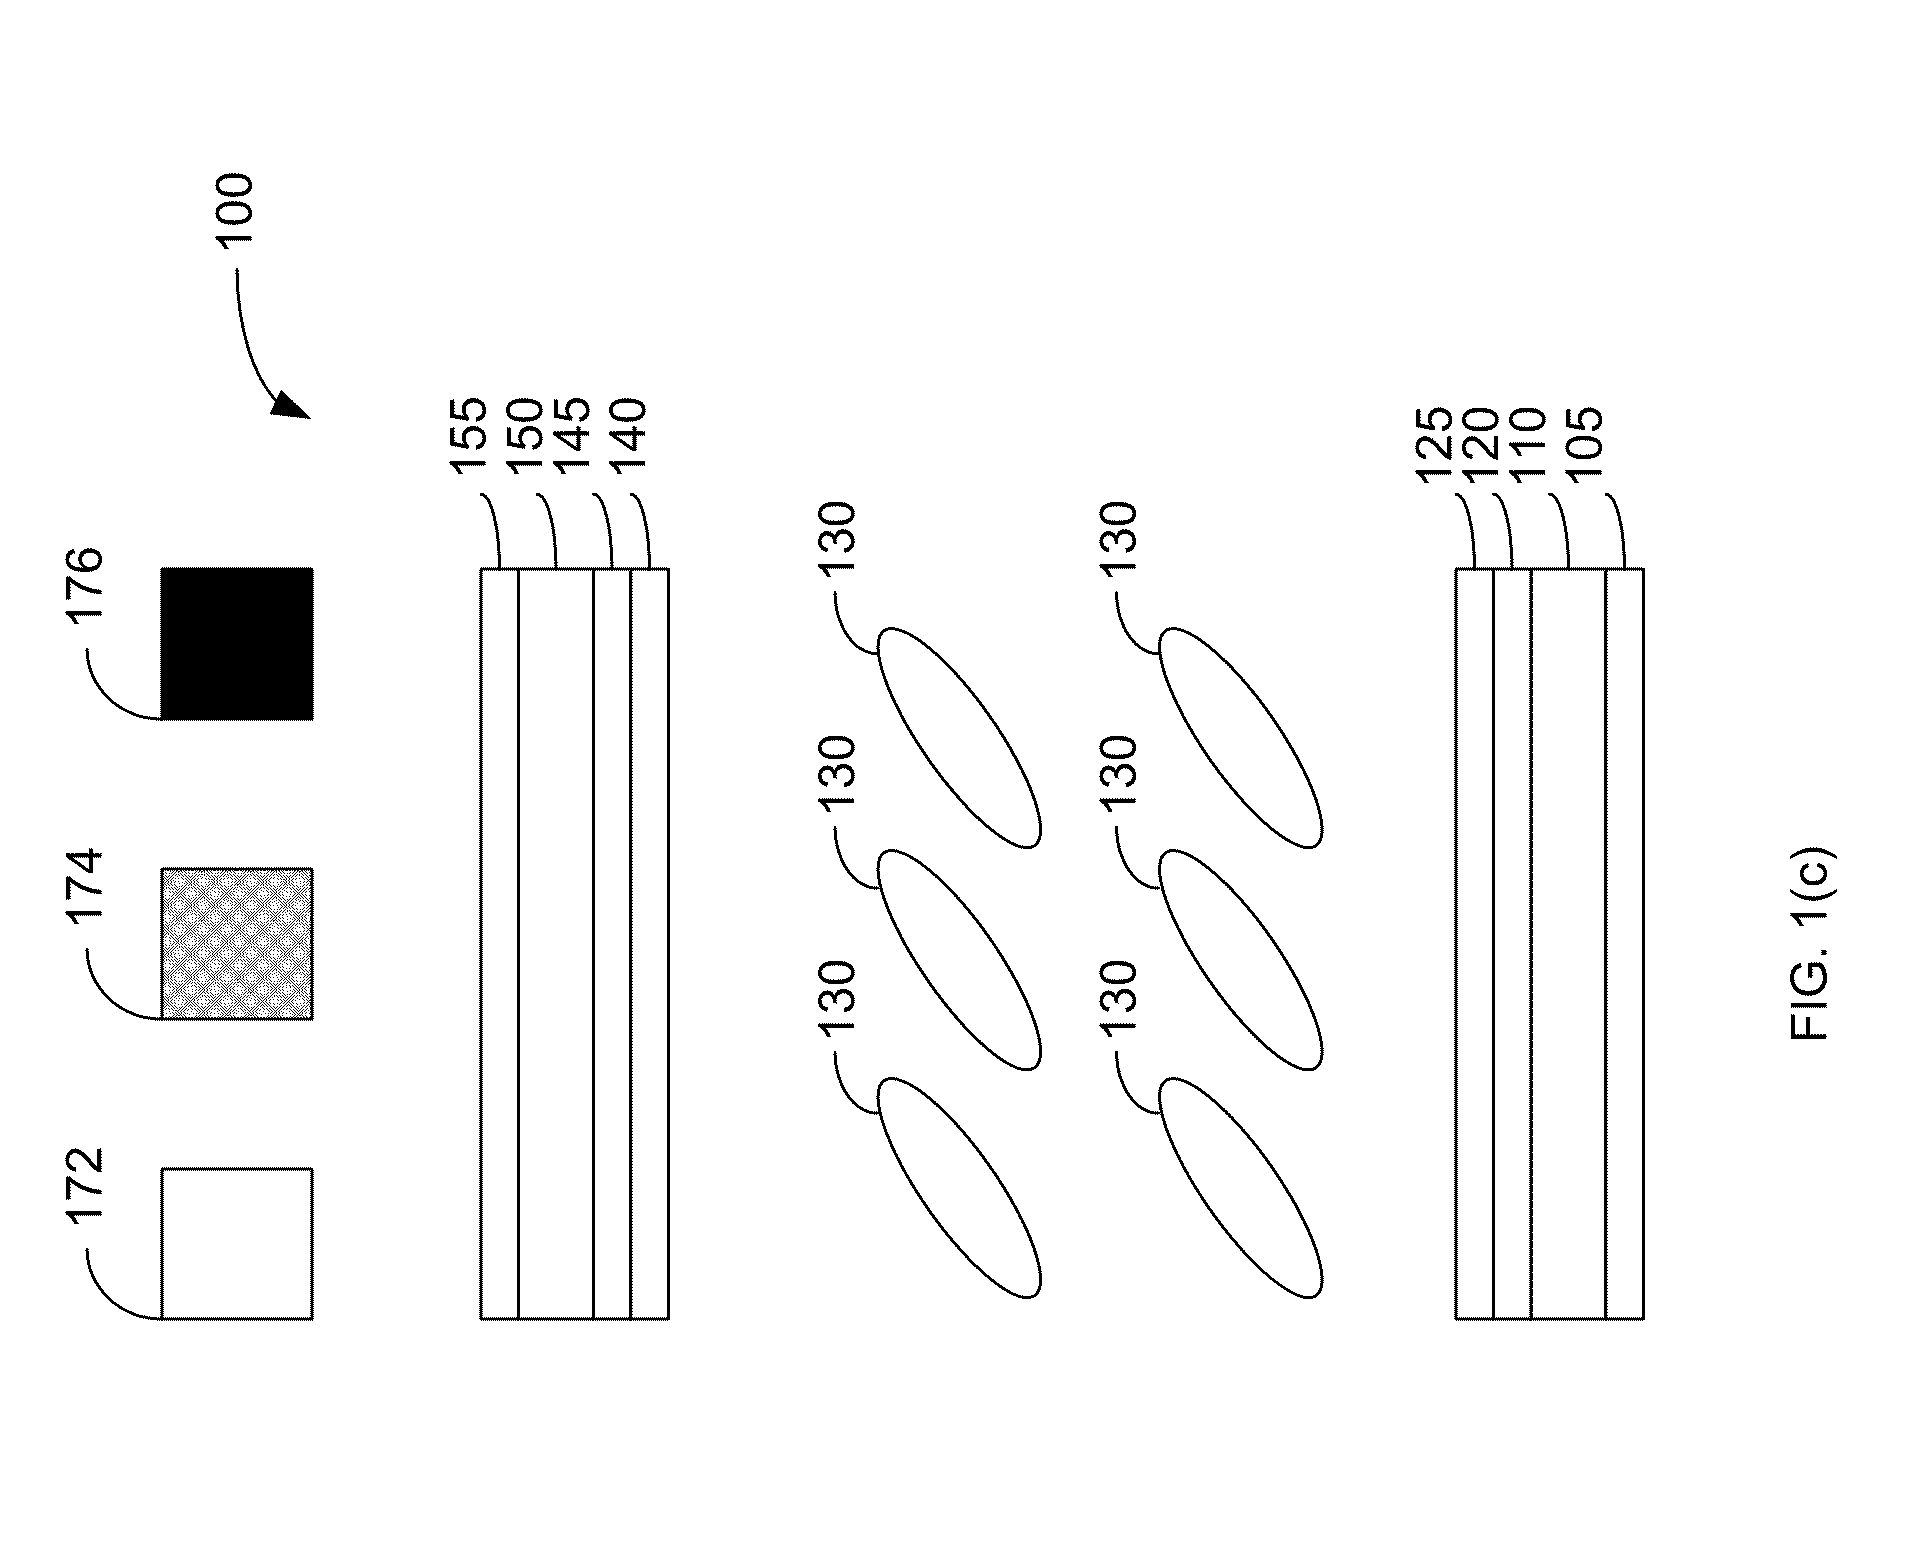 Liquid Crystal Displays Having Color Dots With Embedded Polarity Regions